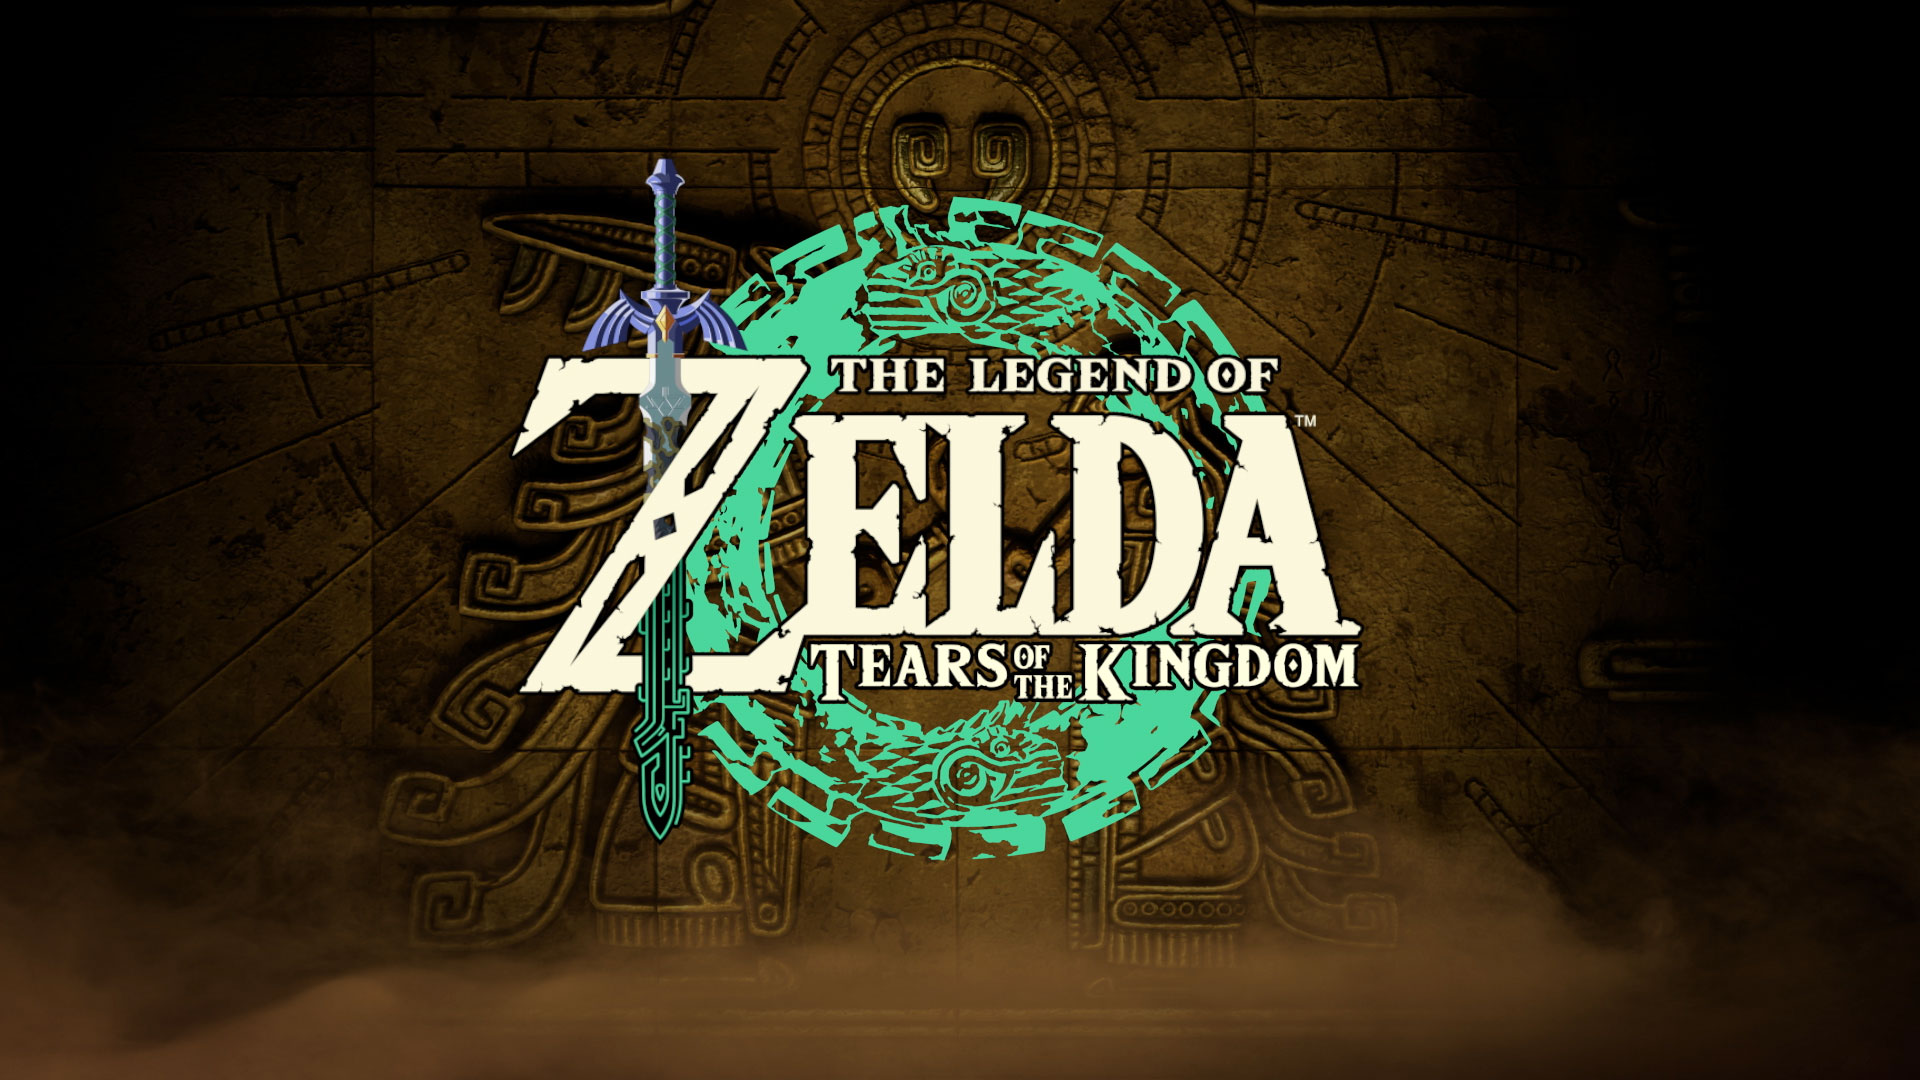 There are no plans to create DLC for The Legend of Zelda: Tears of the Kingdom